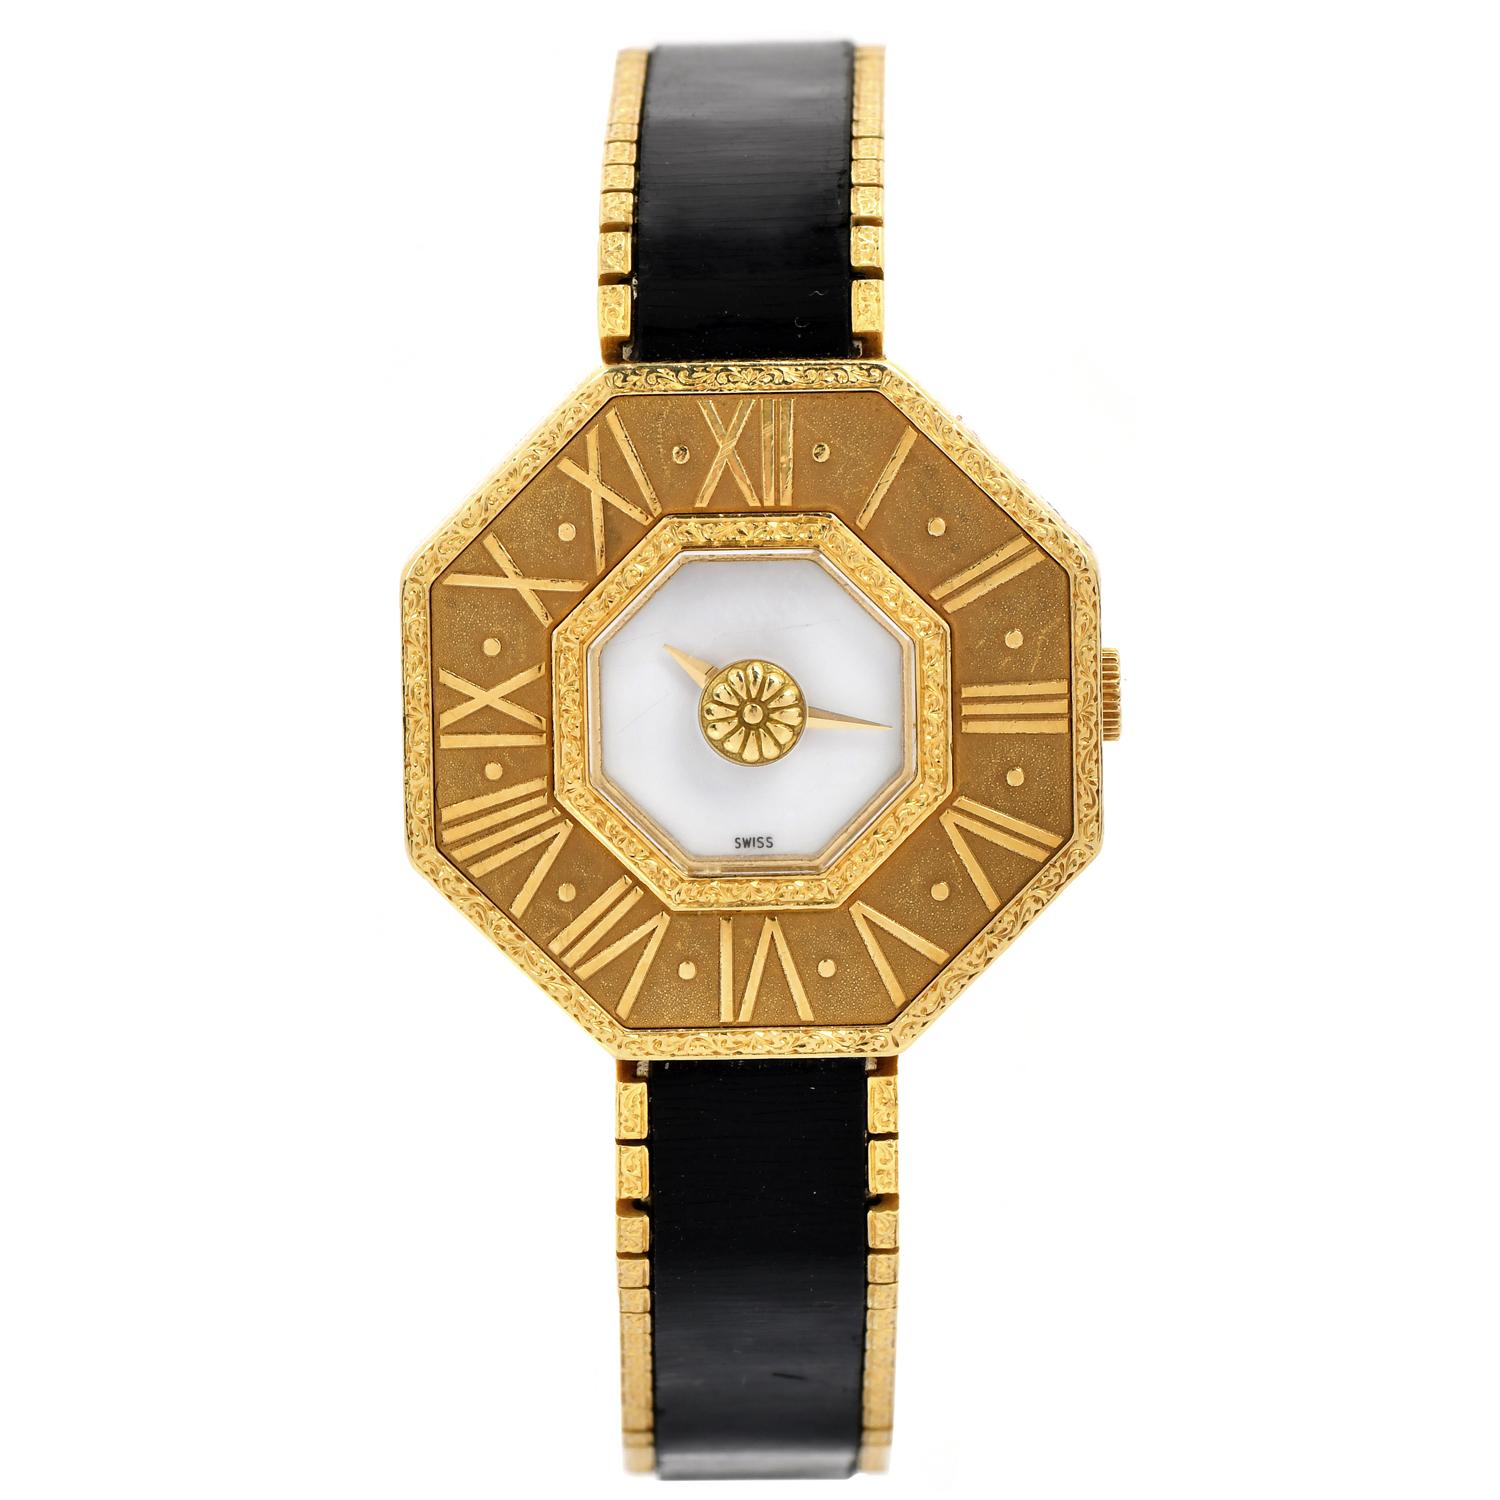 Buccellati is the most exclusive luxury jewelry brand with one-of-a-kind jewelry creations. This Oktachron masterpiece is an example of this perfection.

The exquisite limited edition gold watch is finely crafted in 18k yellow gold with a gold